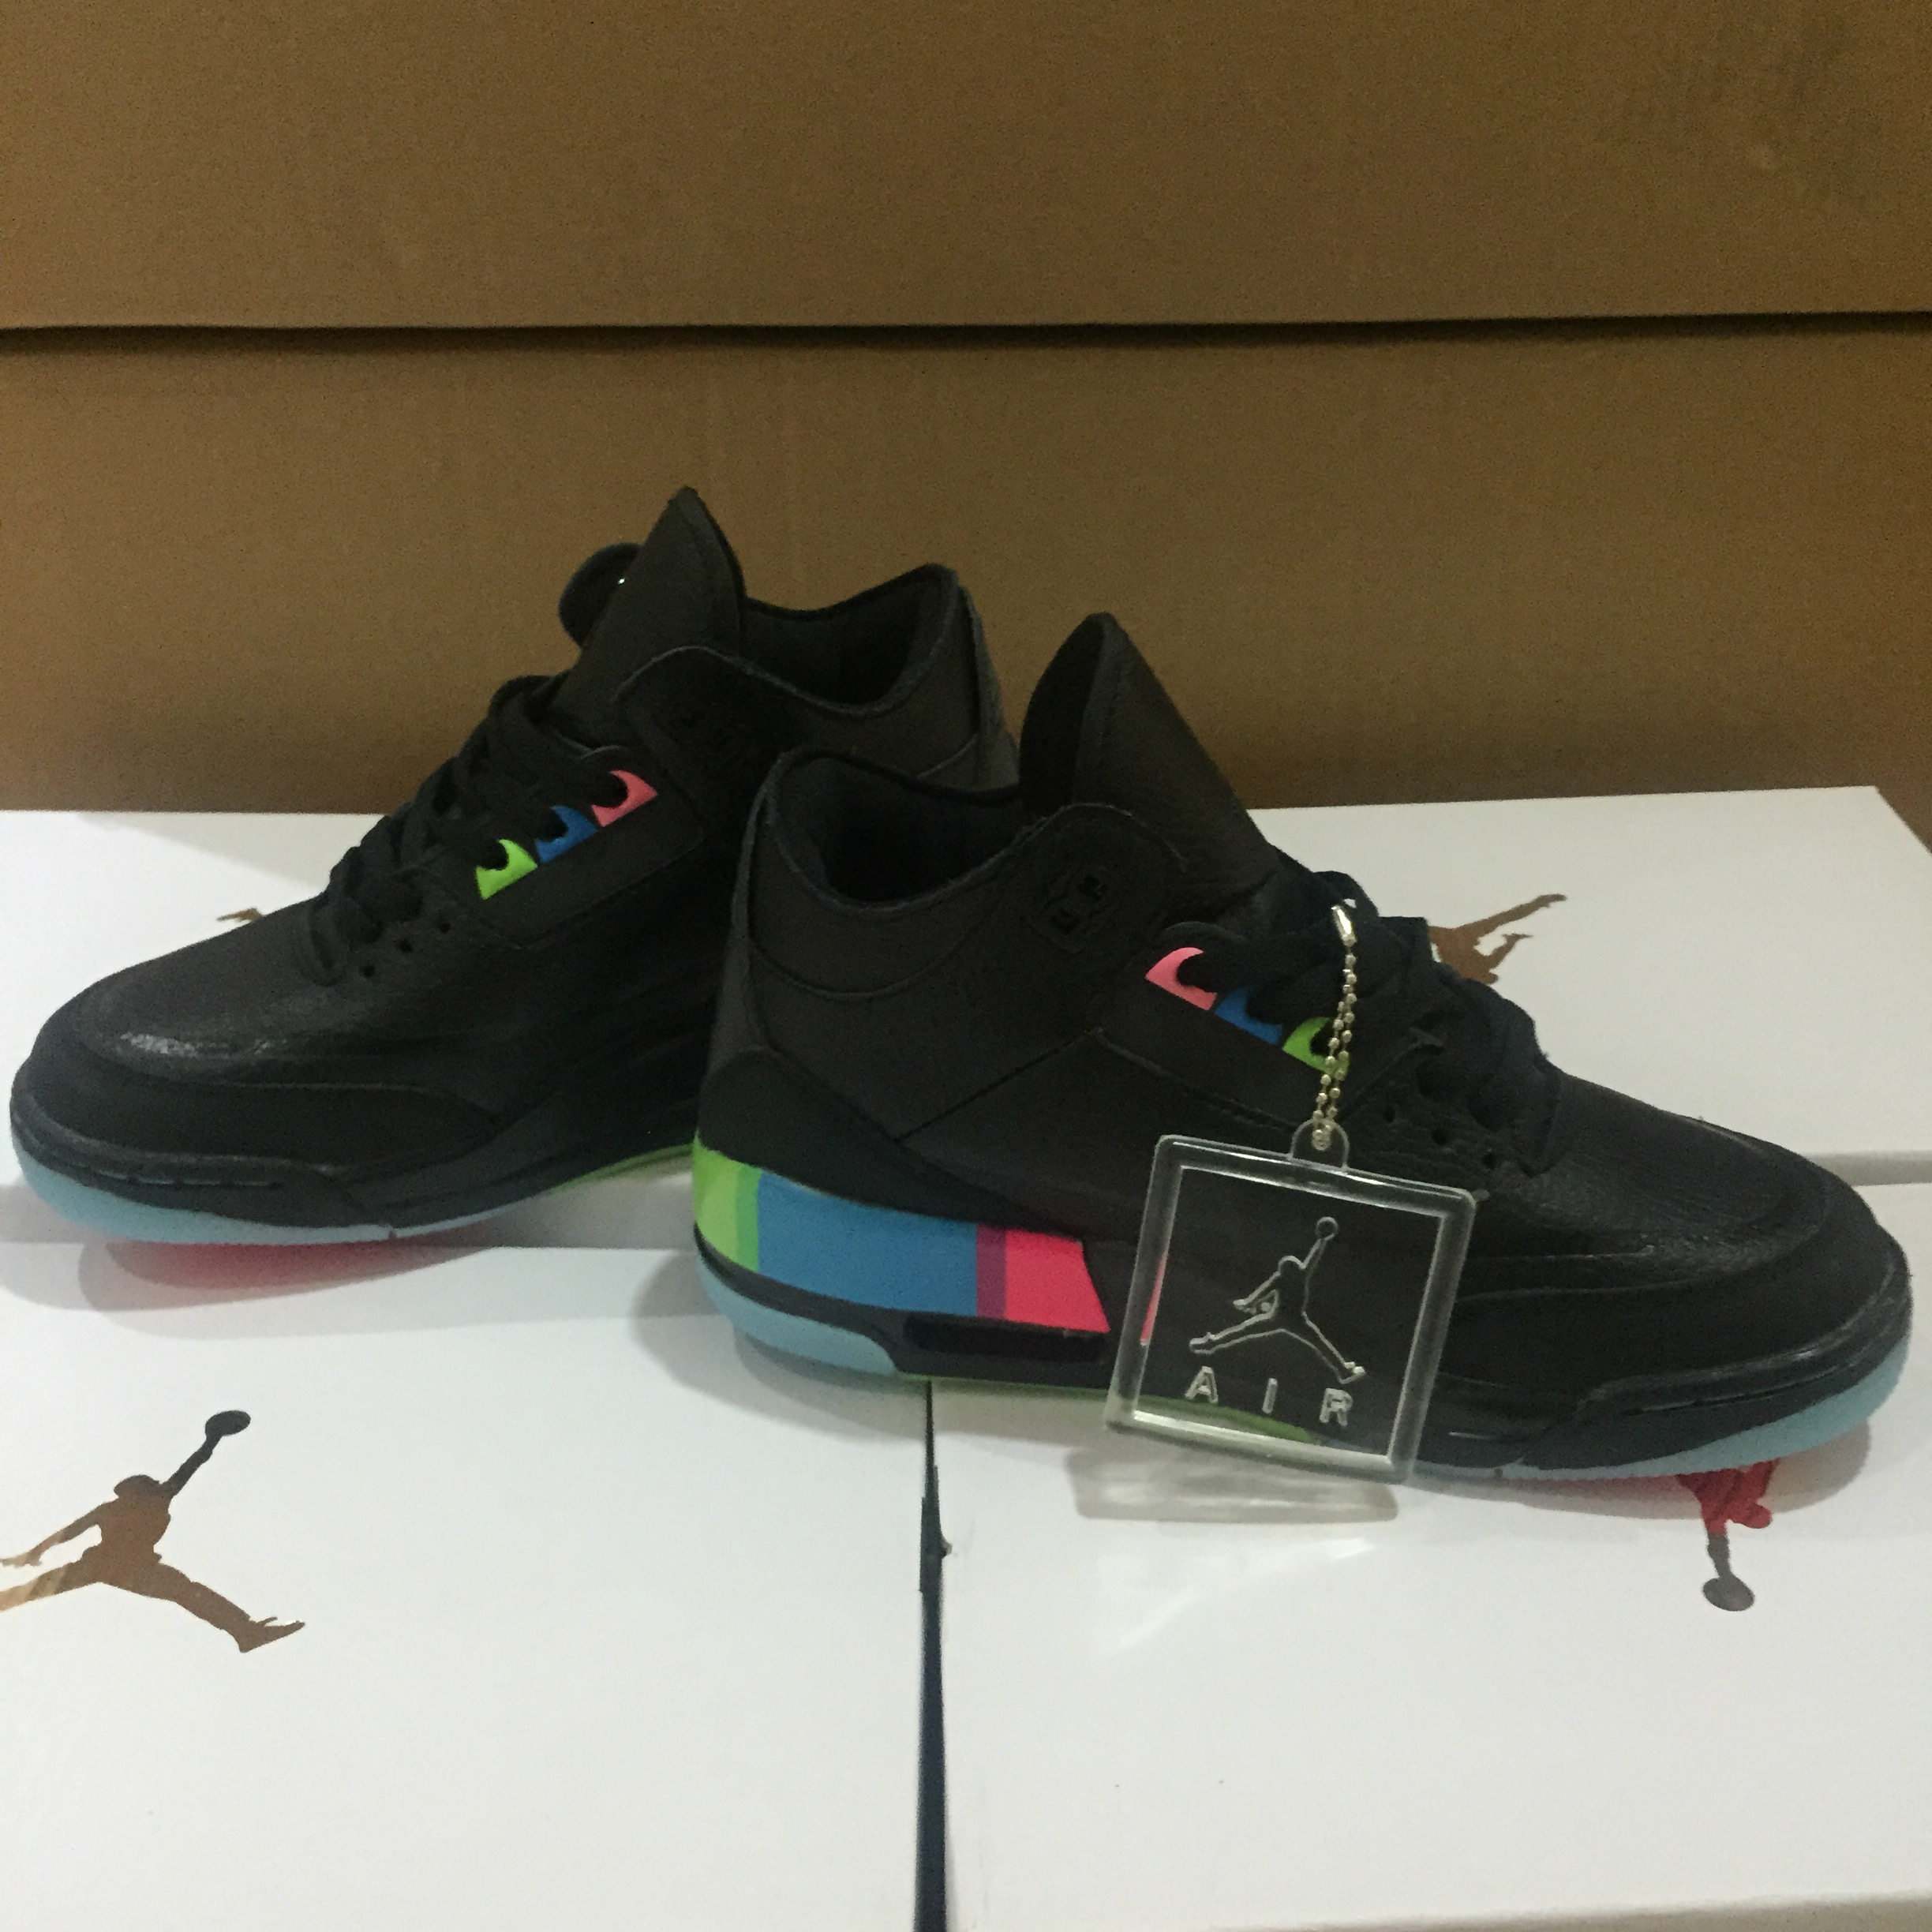 New Women Air Jordan 3 Black Rianbow Shoes - Click Image to Close